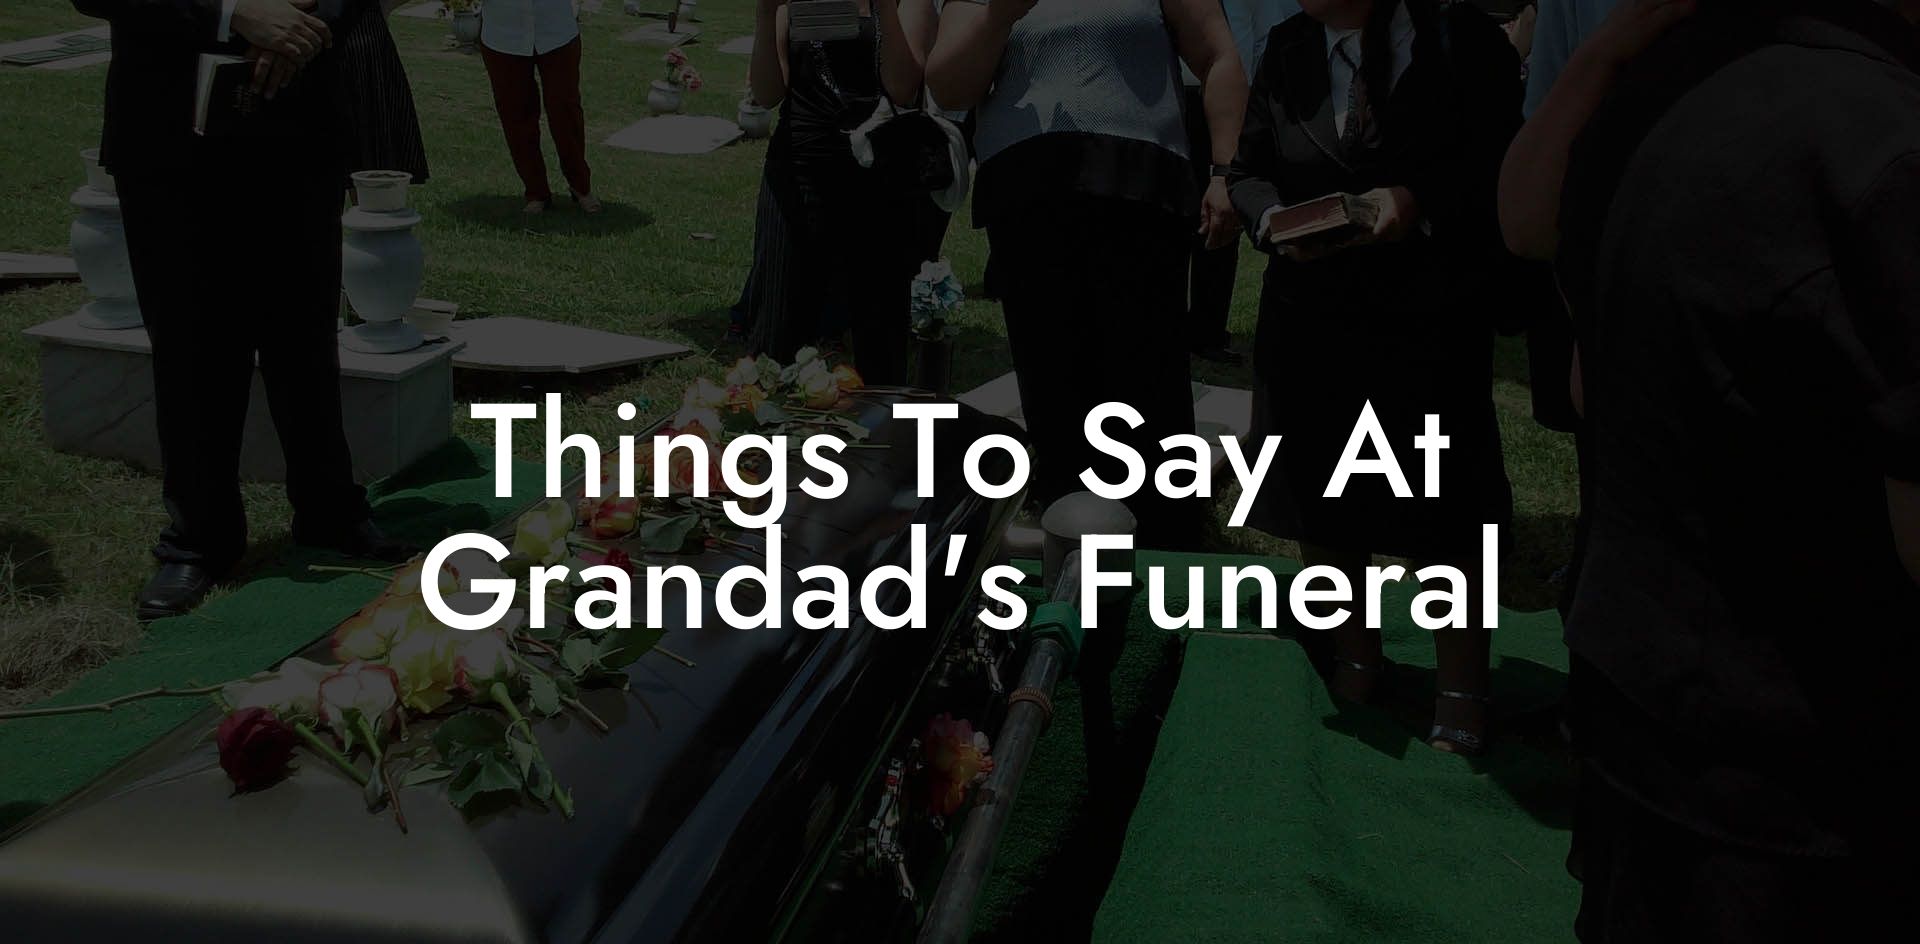 Things To Say At Grandad's Funeral